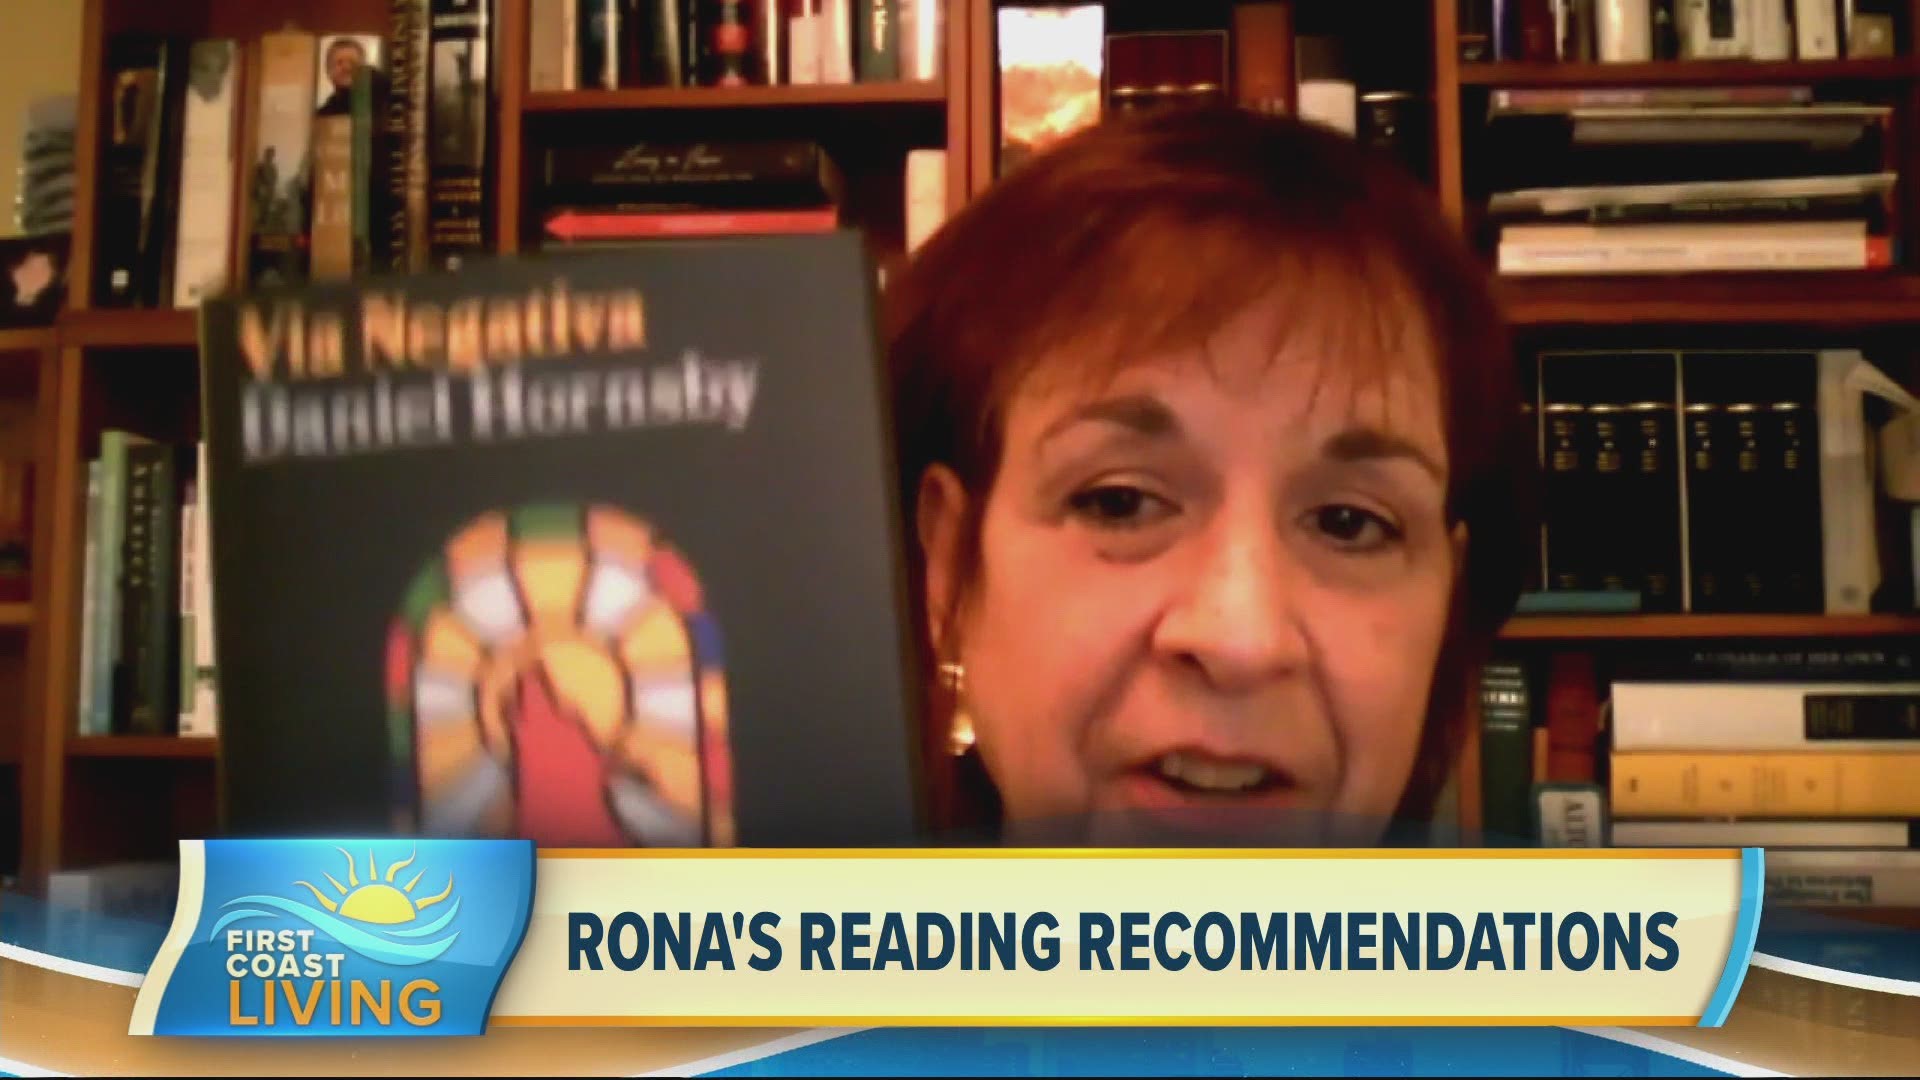 Rona offers up some book ideas for your 2021 reading collection.